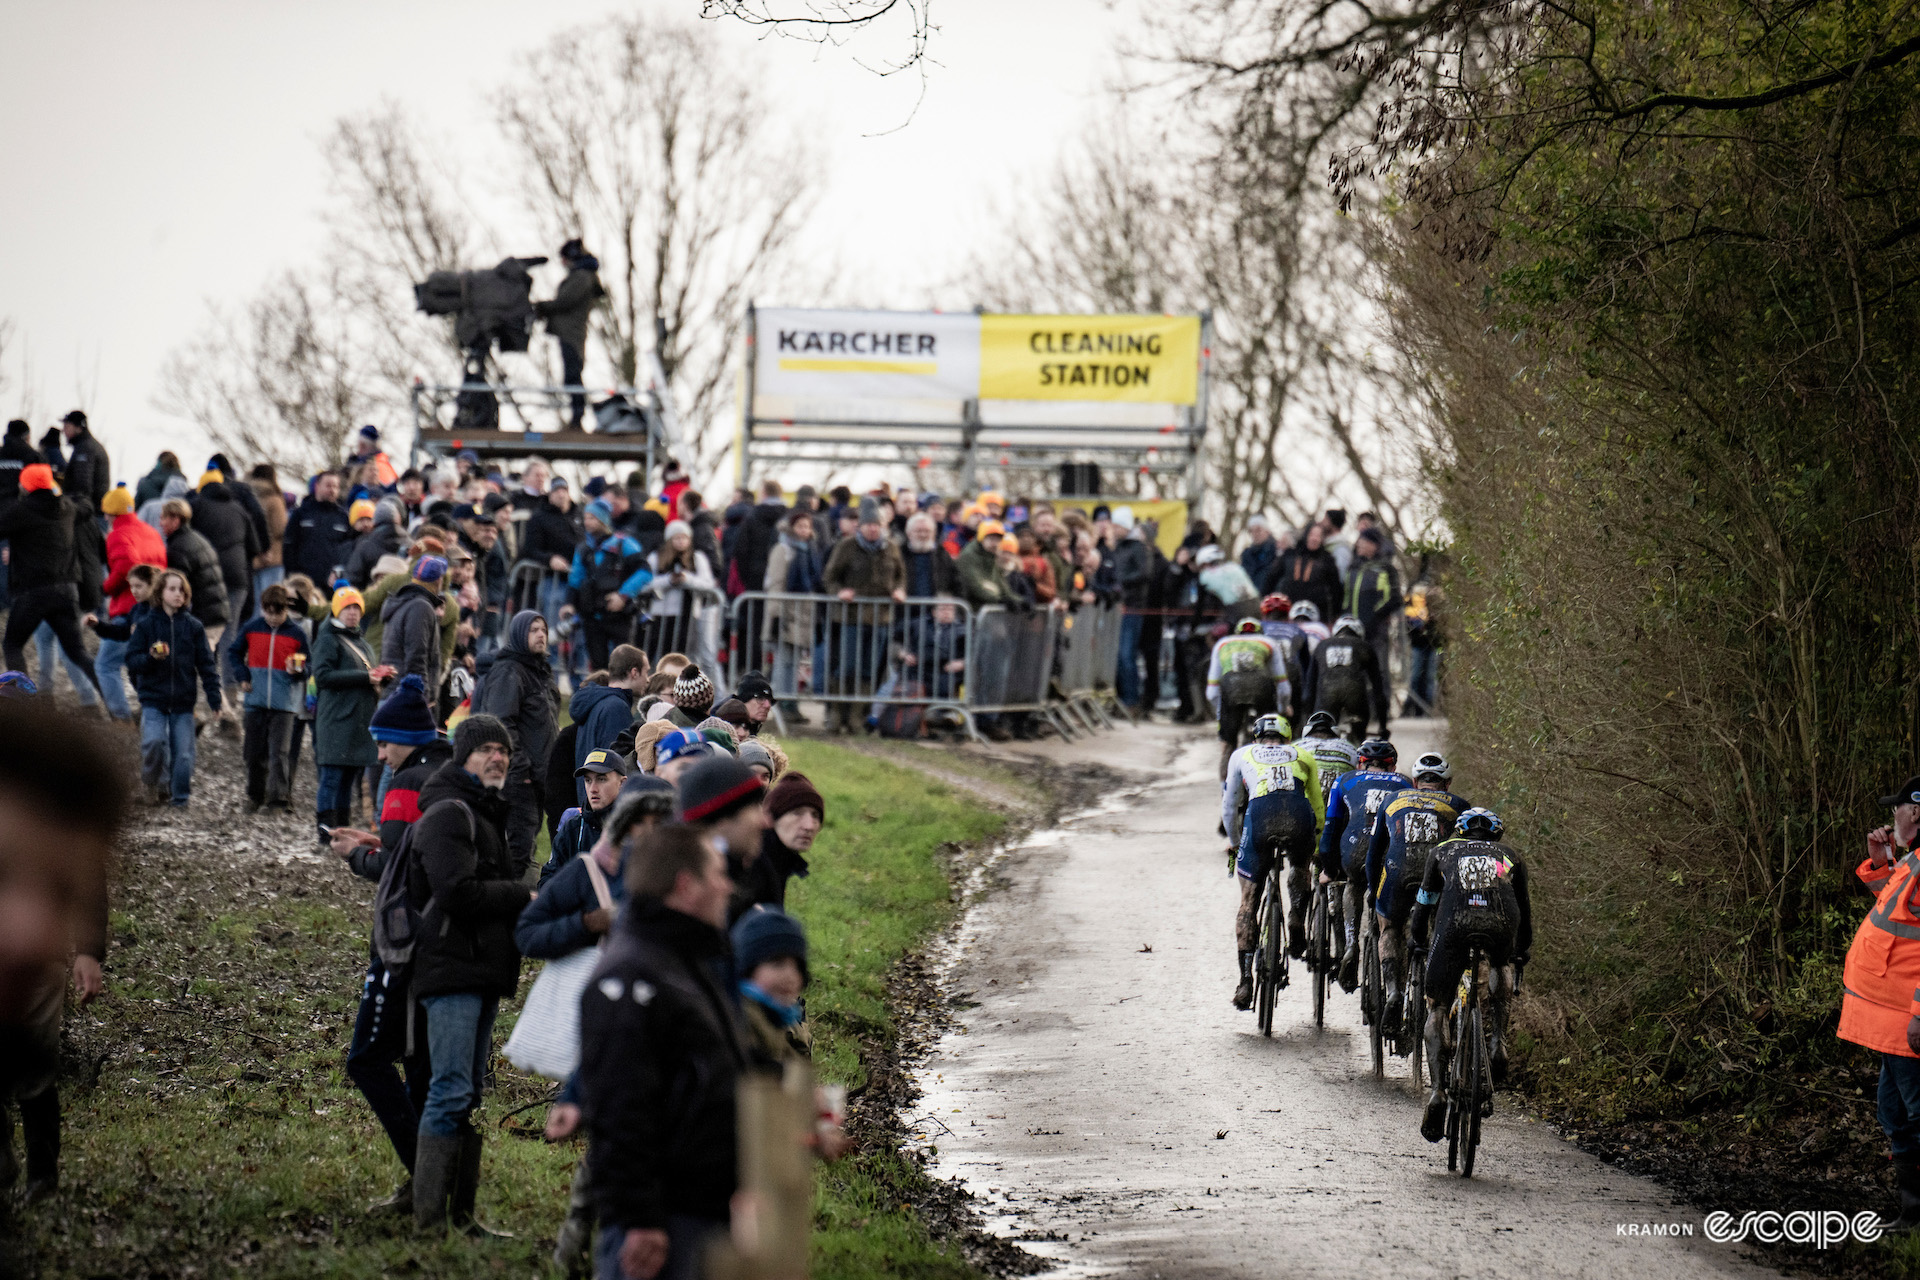 A group of elite men ride the road section towards the much-needed cleaning station during the GP Sven Nys, X2O Trofee Baal.